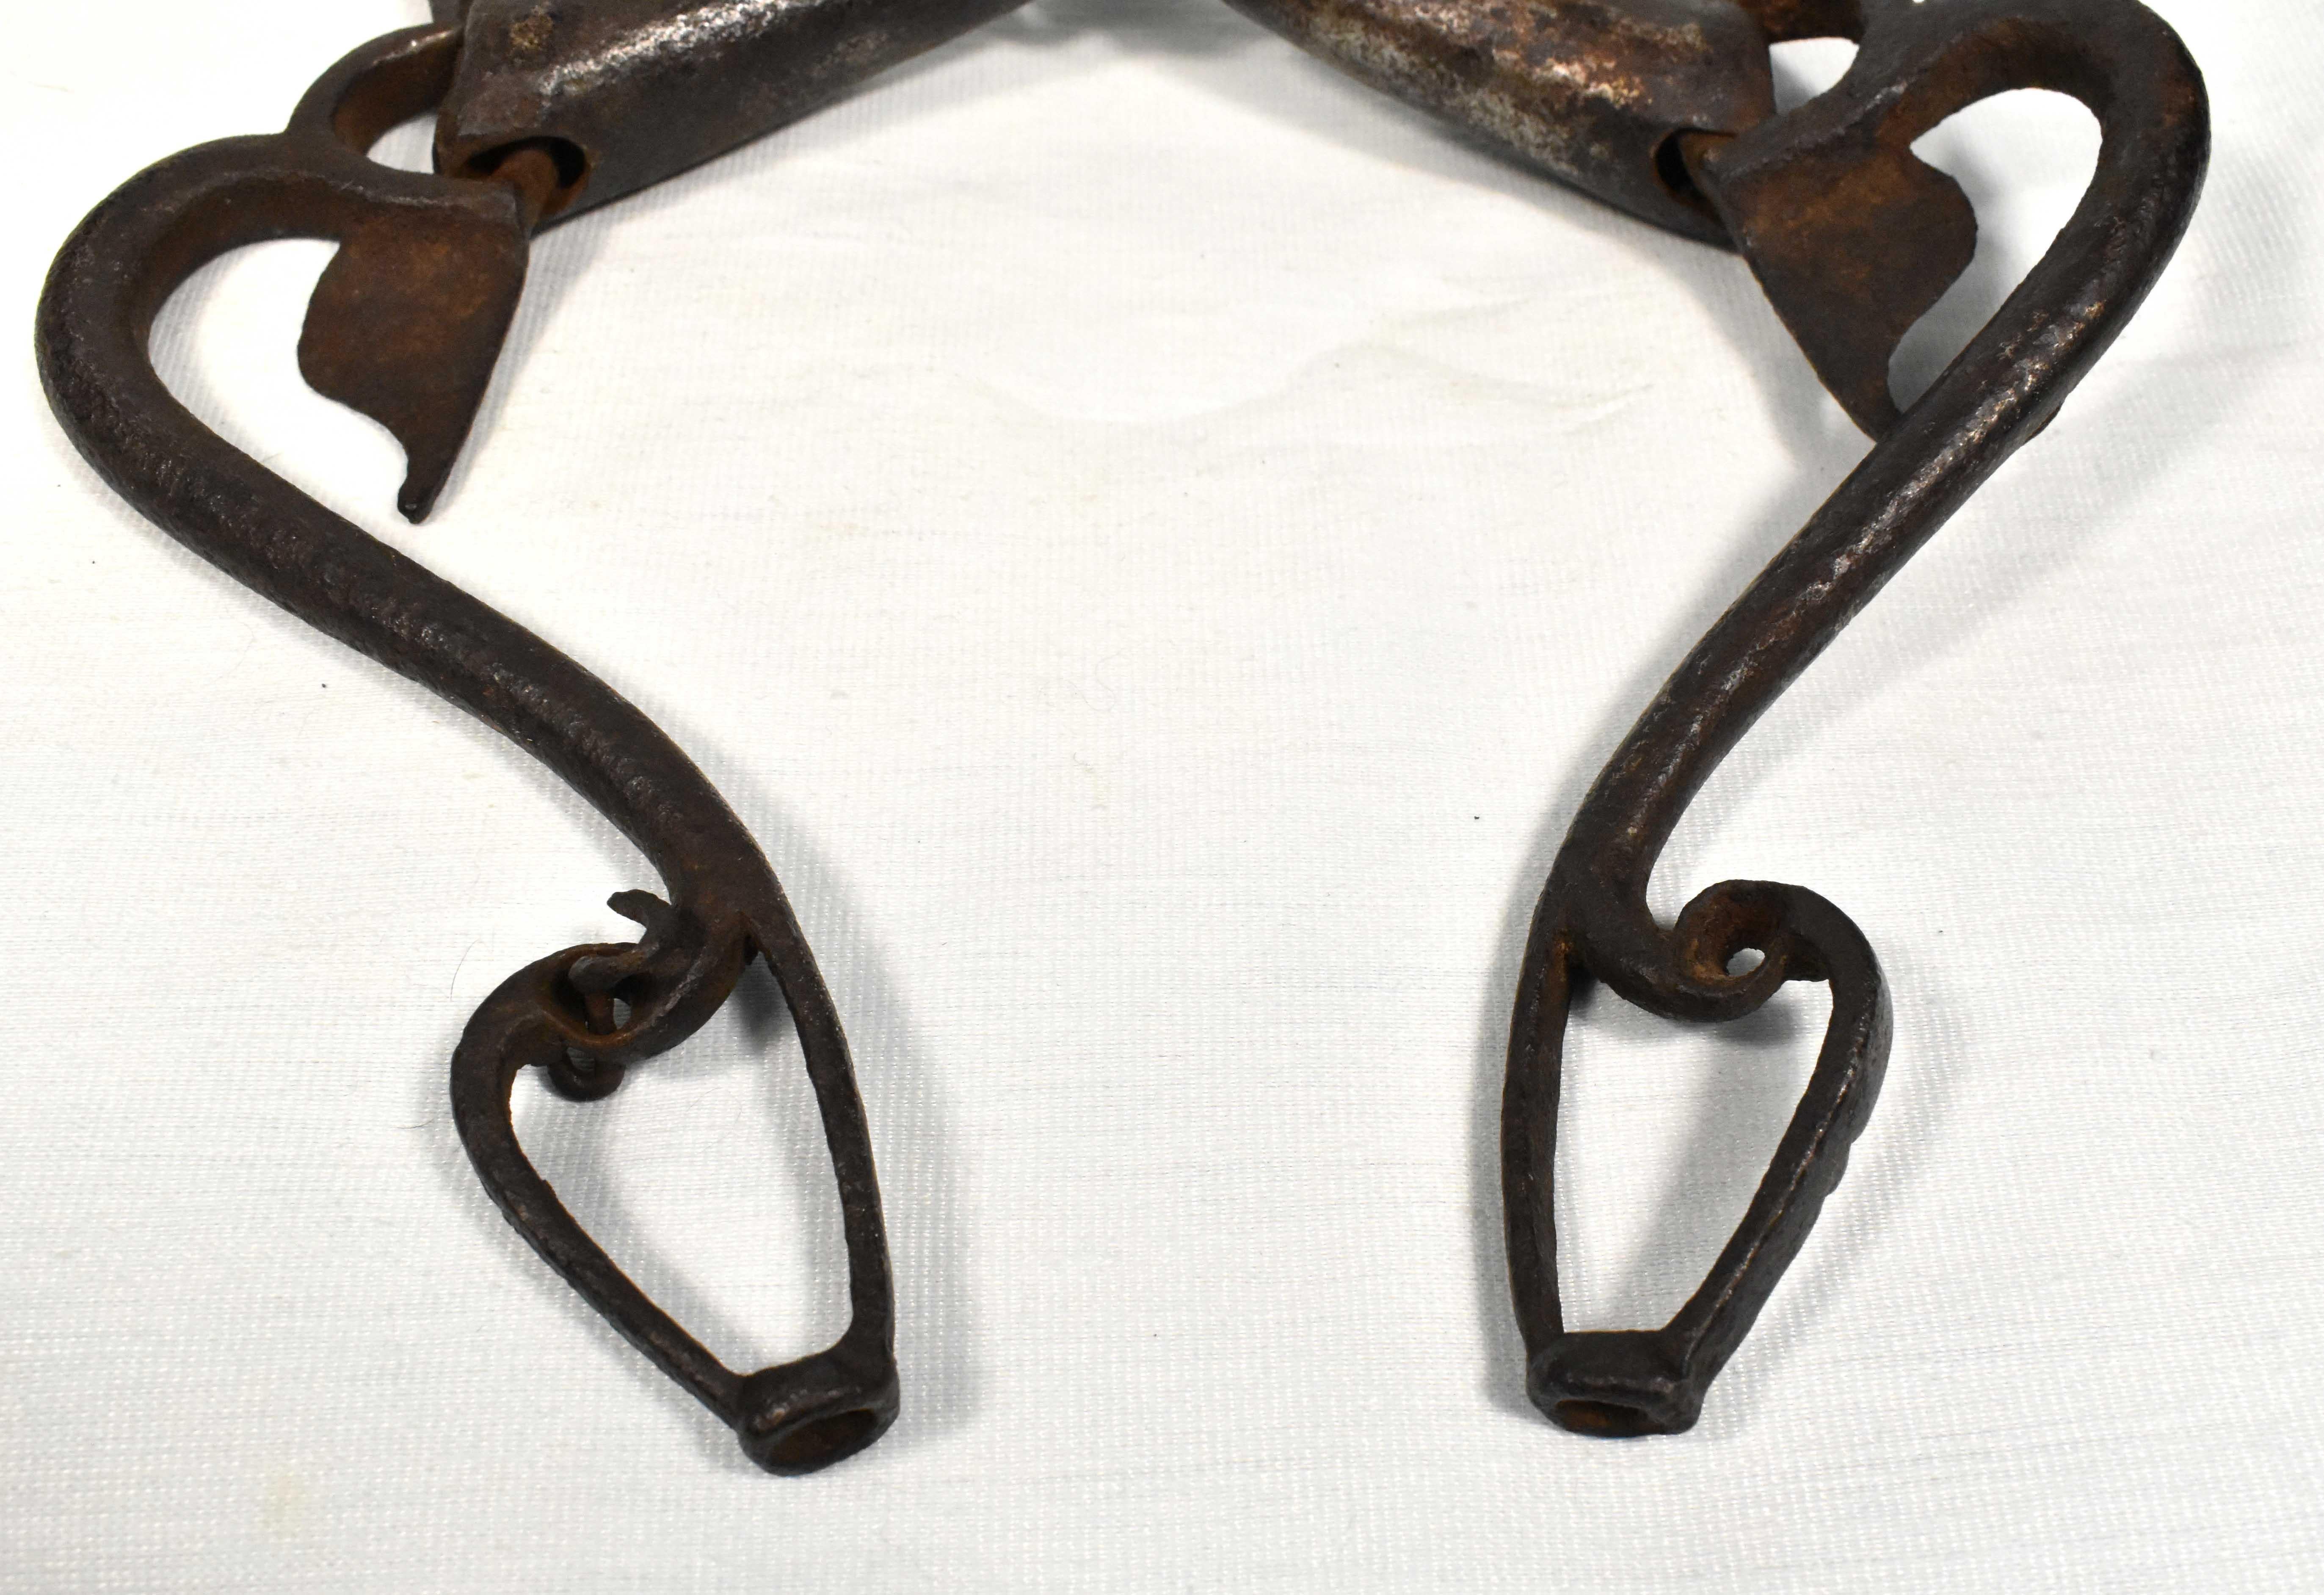 Metal Unique Historical Horse Bit from the 16th-17th Century For Sale